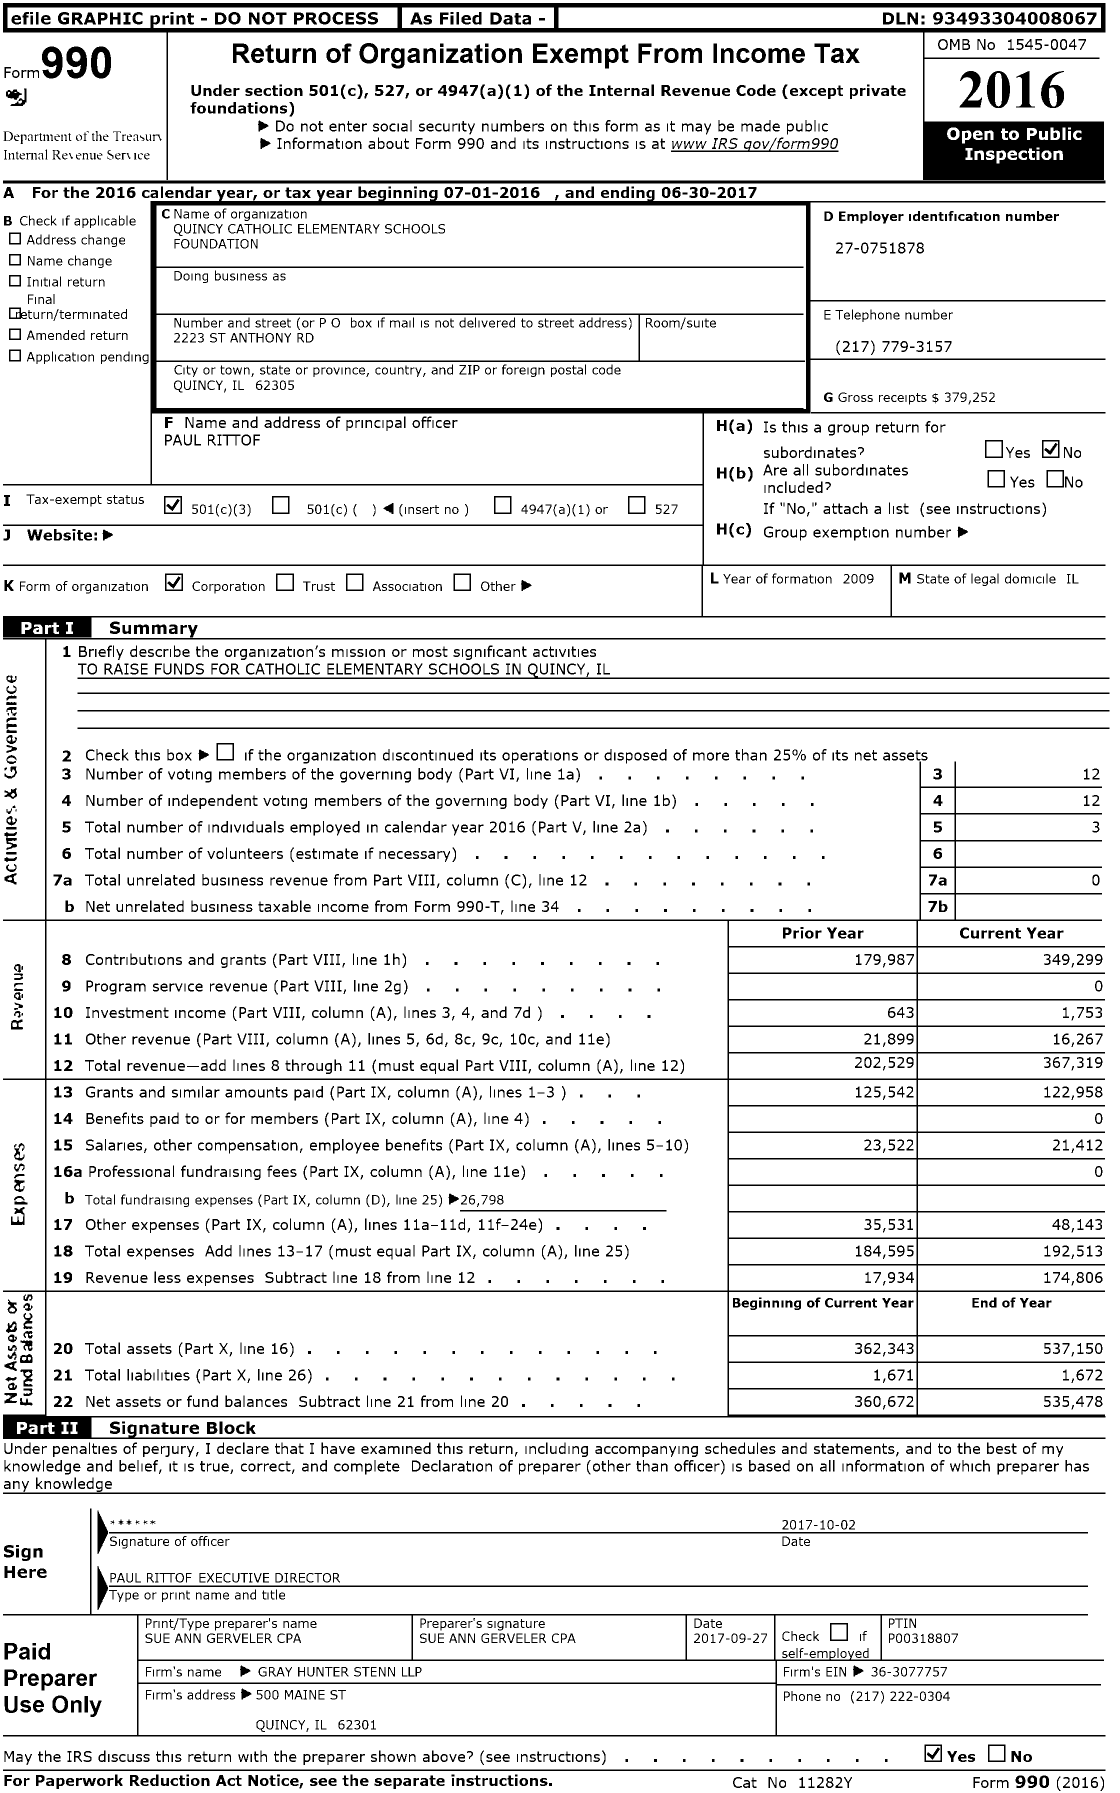 Image of first page of 2016 Form 990 for Quincy Catholic Elementary Schools Foundation